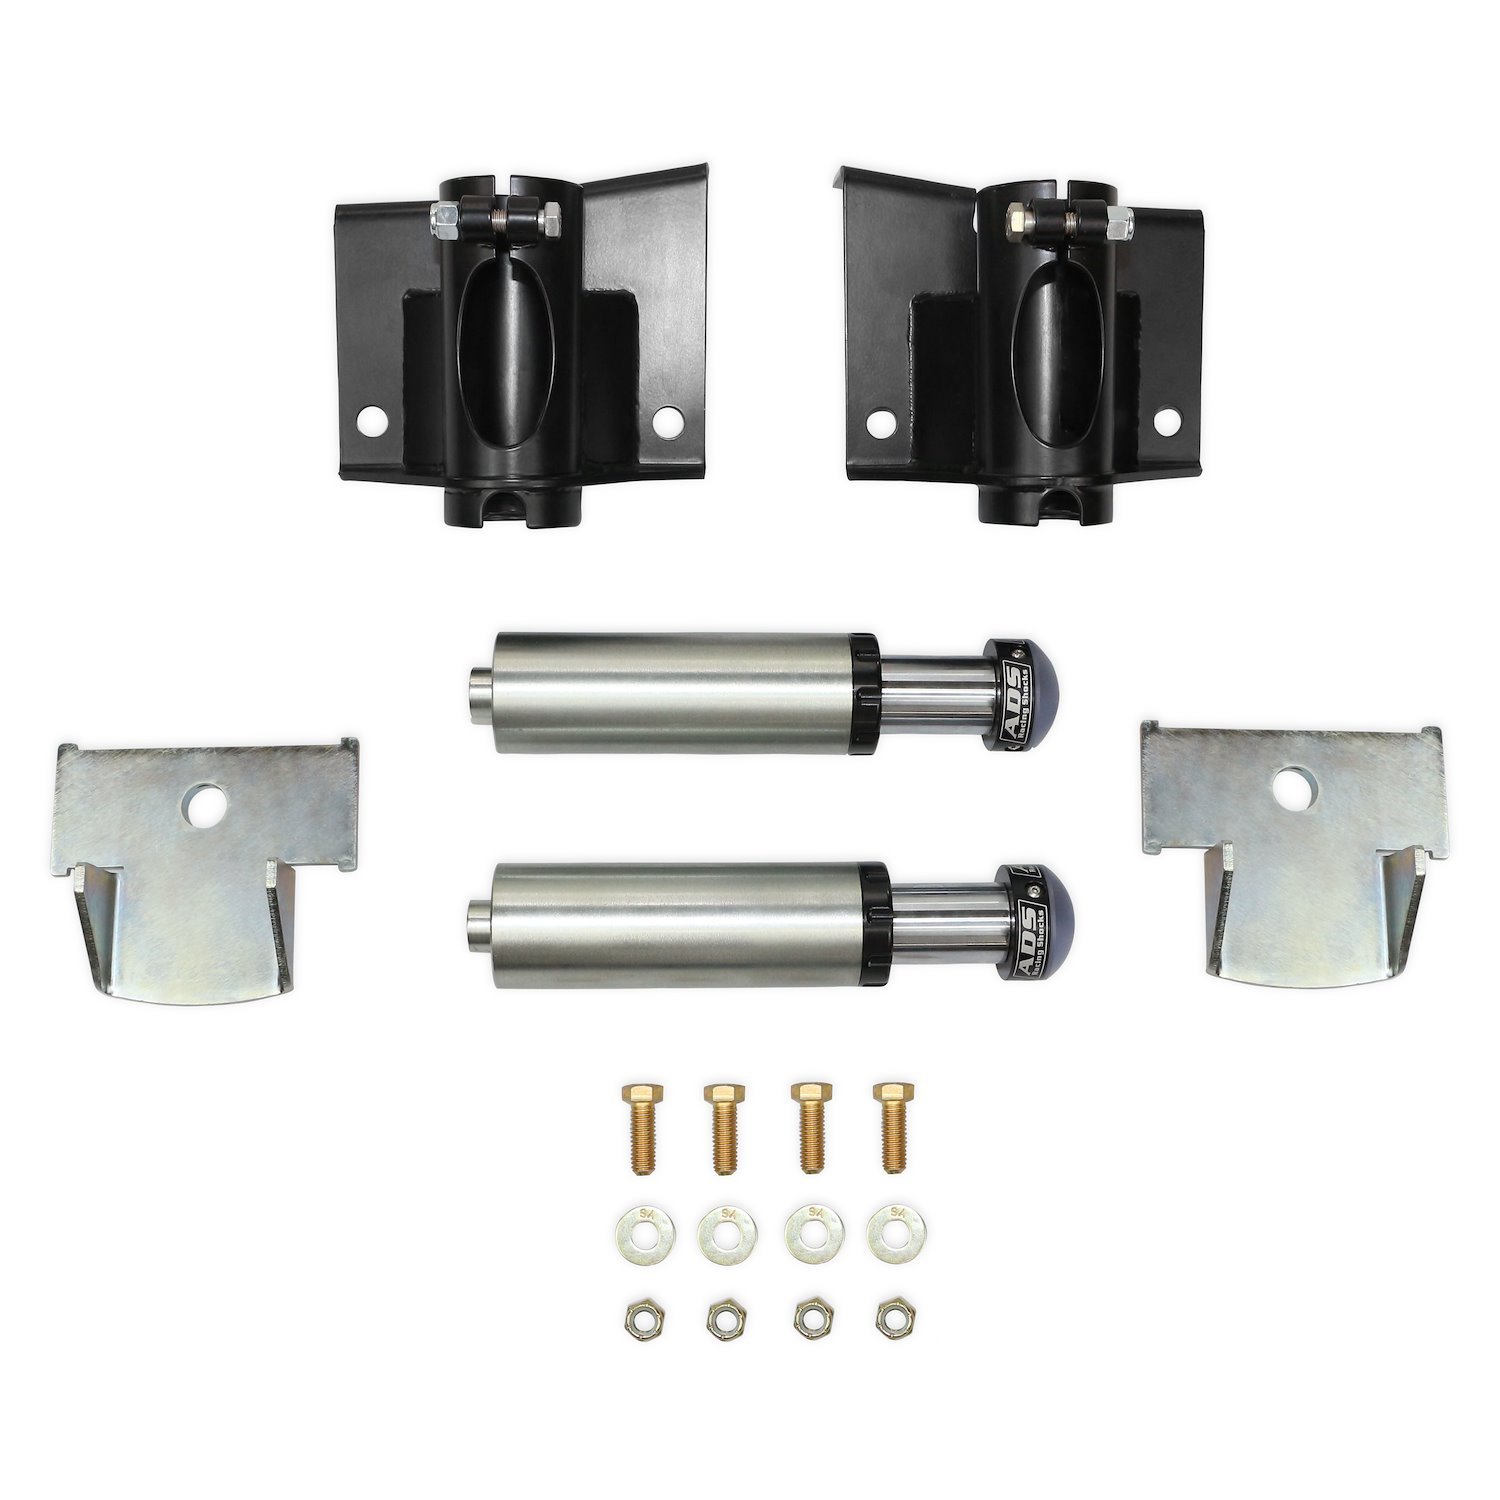 213-BSTT5-KIT 2.125 in. Bolt-In Bump Stop Kit, Fits Select Toyota Tacoma 4WD, Factory Location